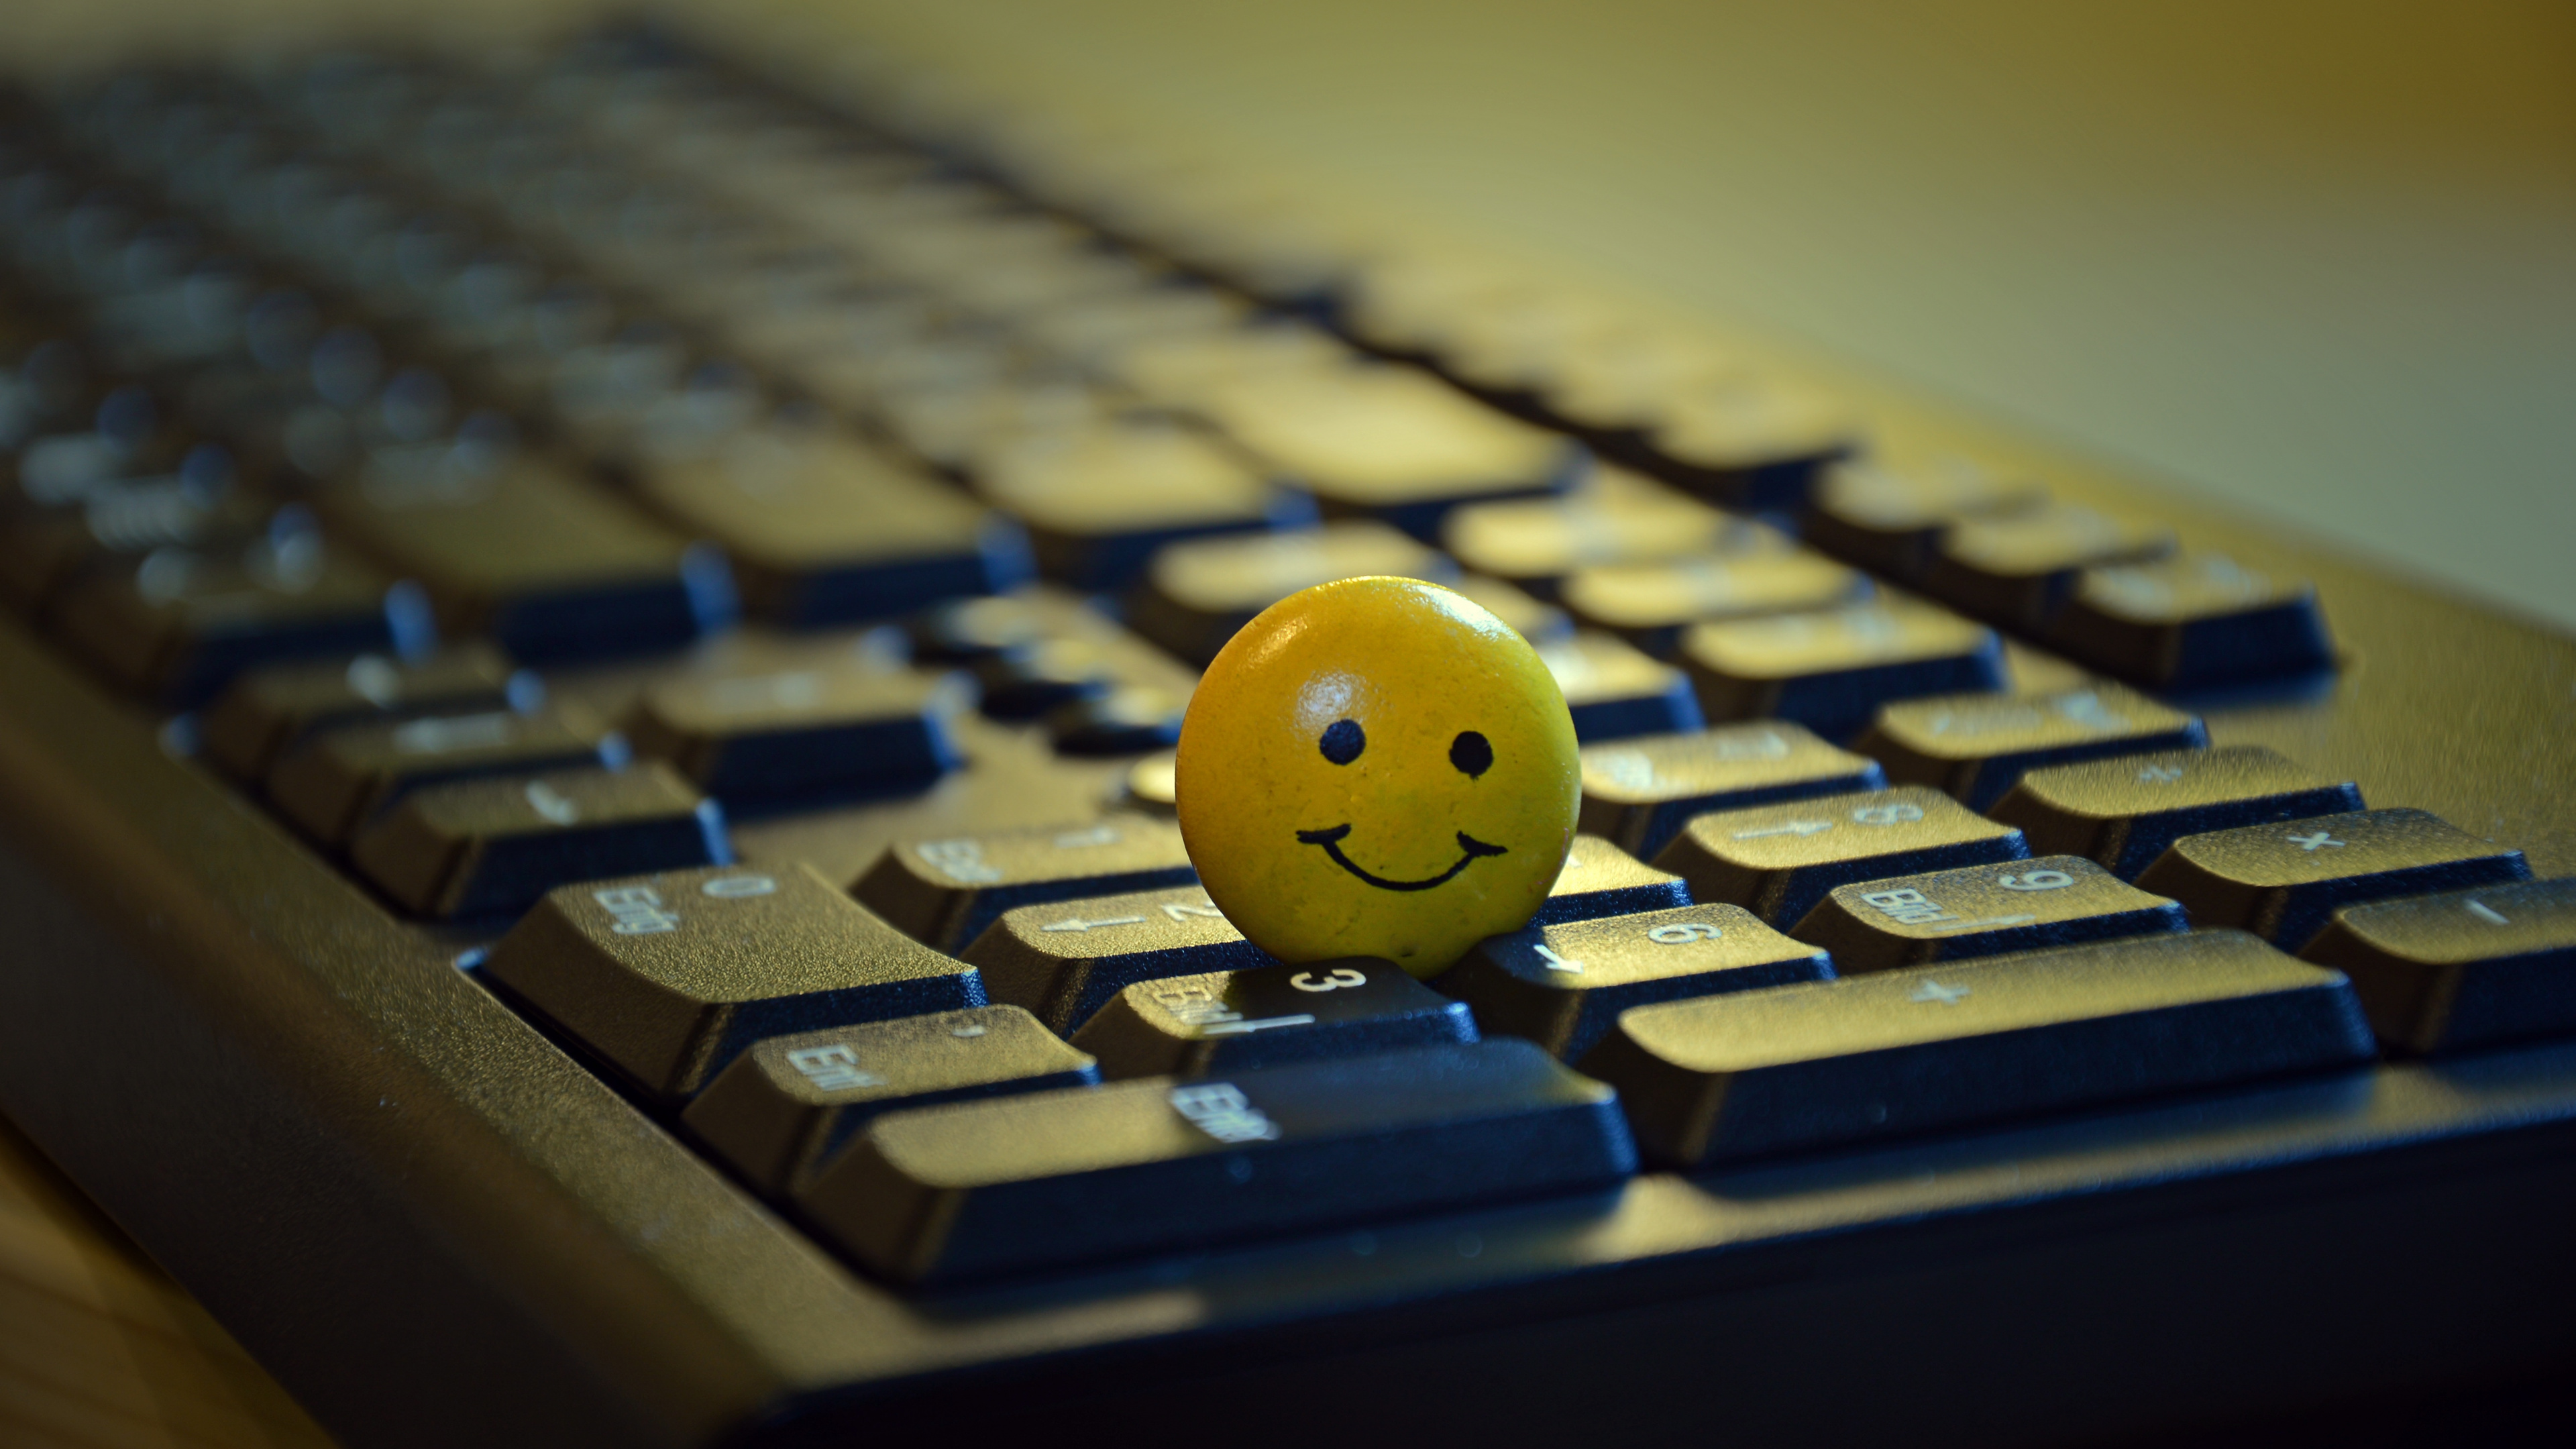 Yellow Smiley Ball on Black Computer Keyboard. Wallpaper in 3840x2160 Resolution